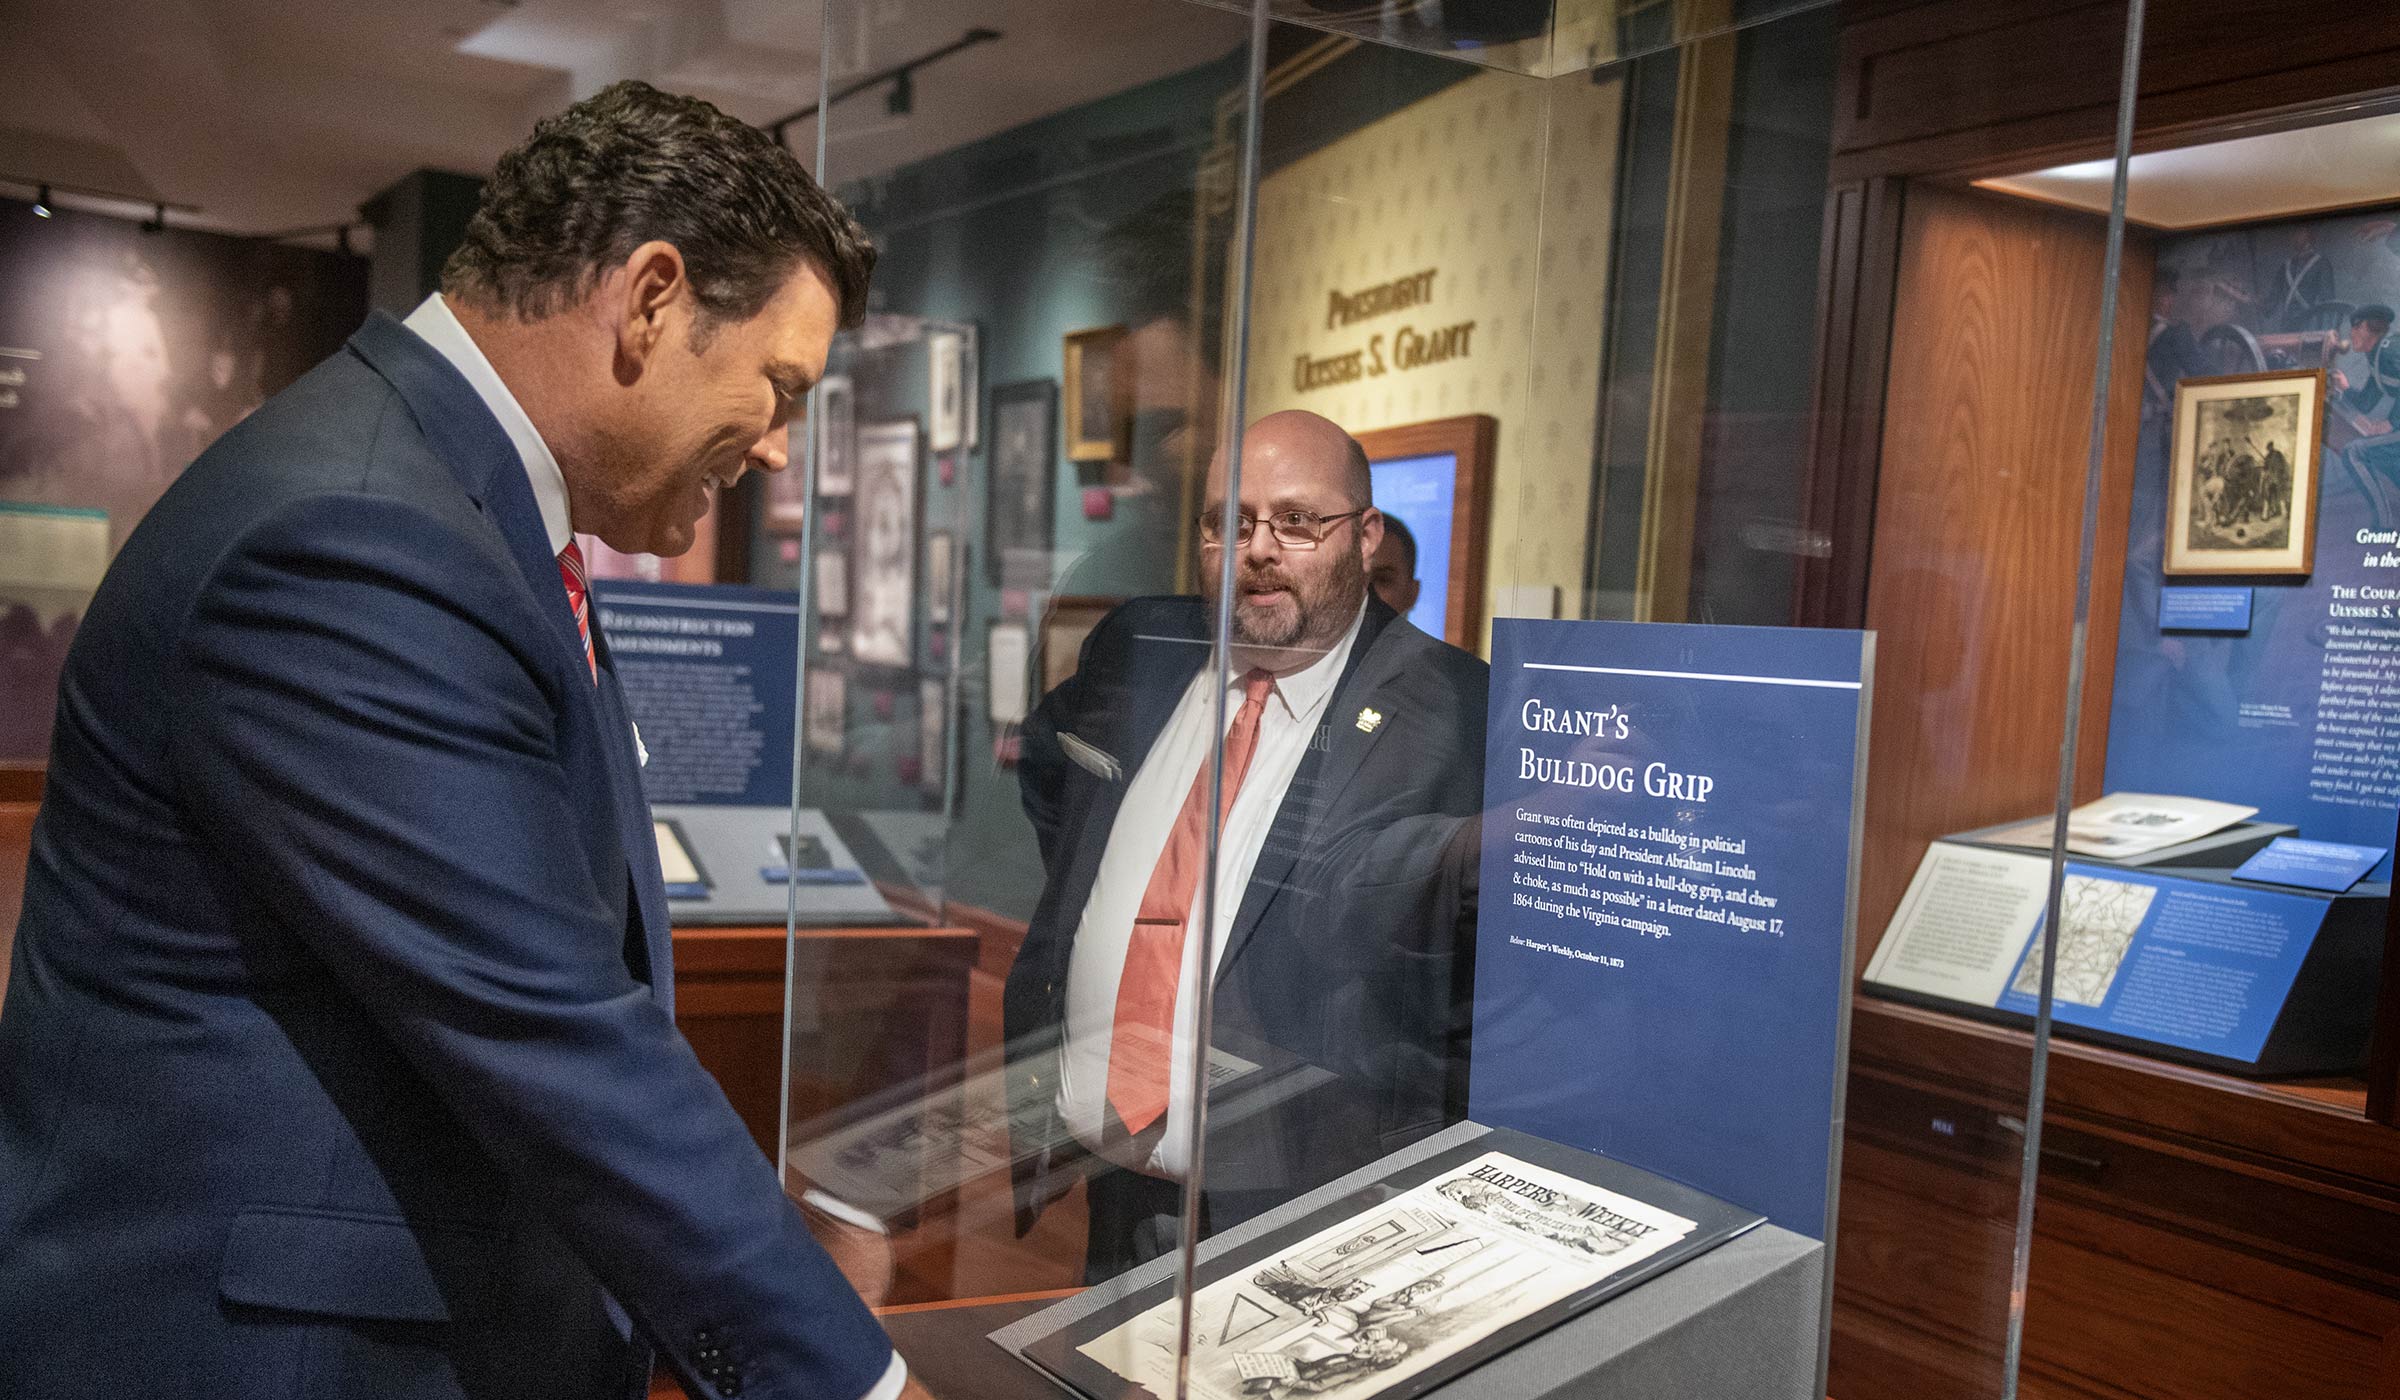 Bret Baier looks into a Grant Presidential Library case while Ryan Semmes explains the &quot;Bulldog Grip&quot; exhibit to him.